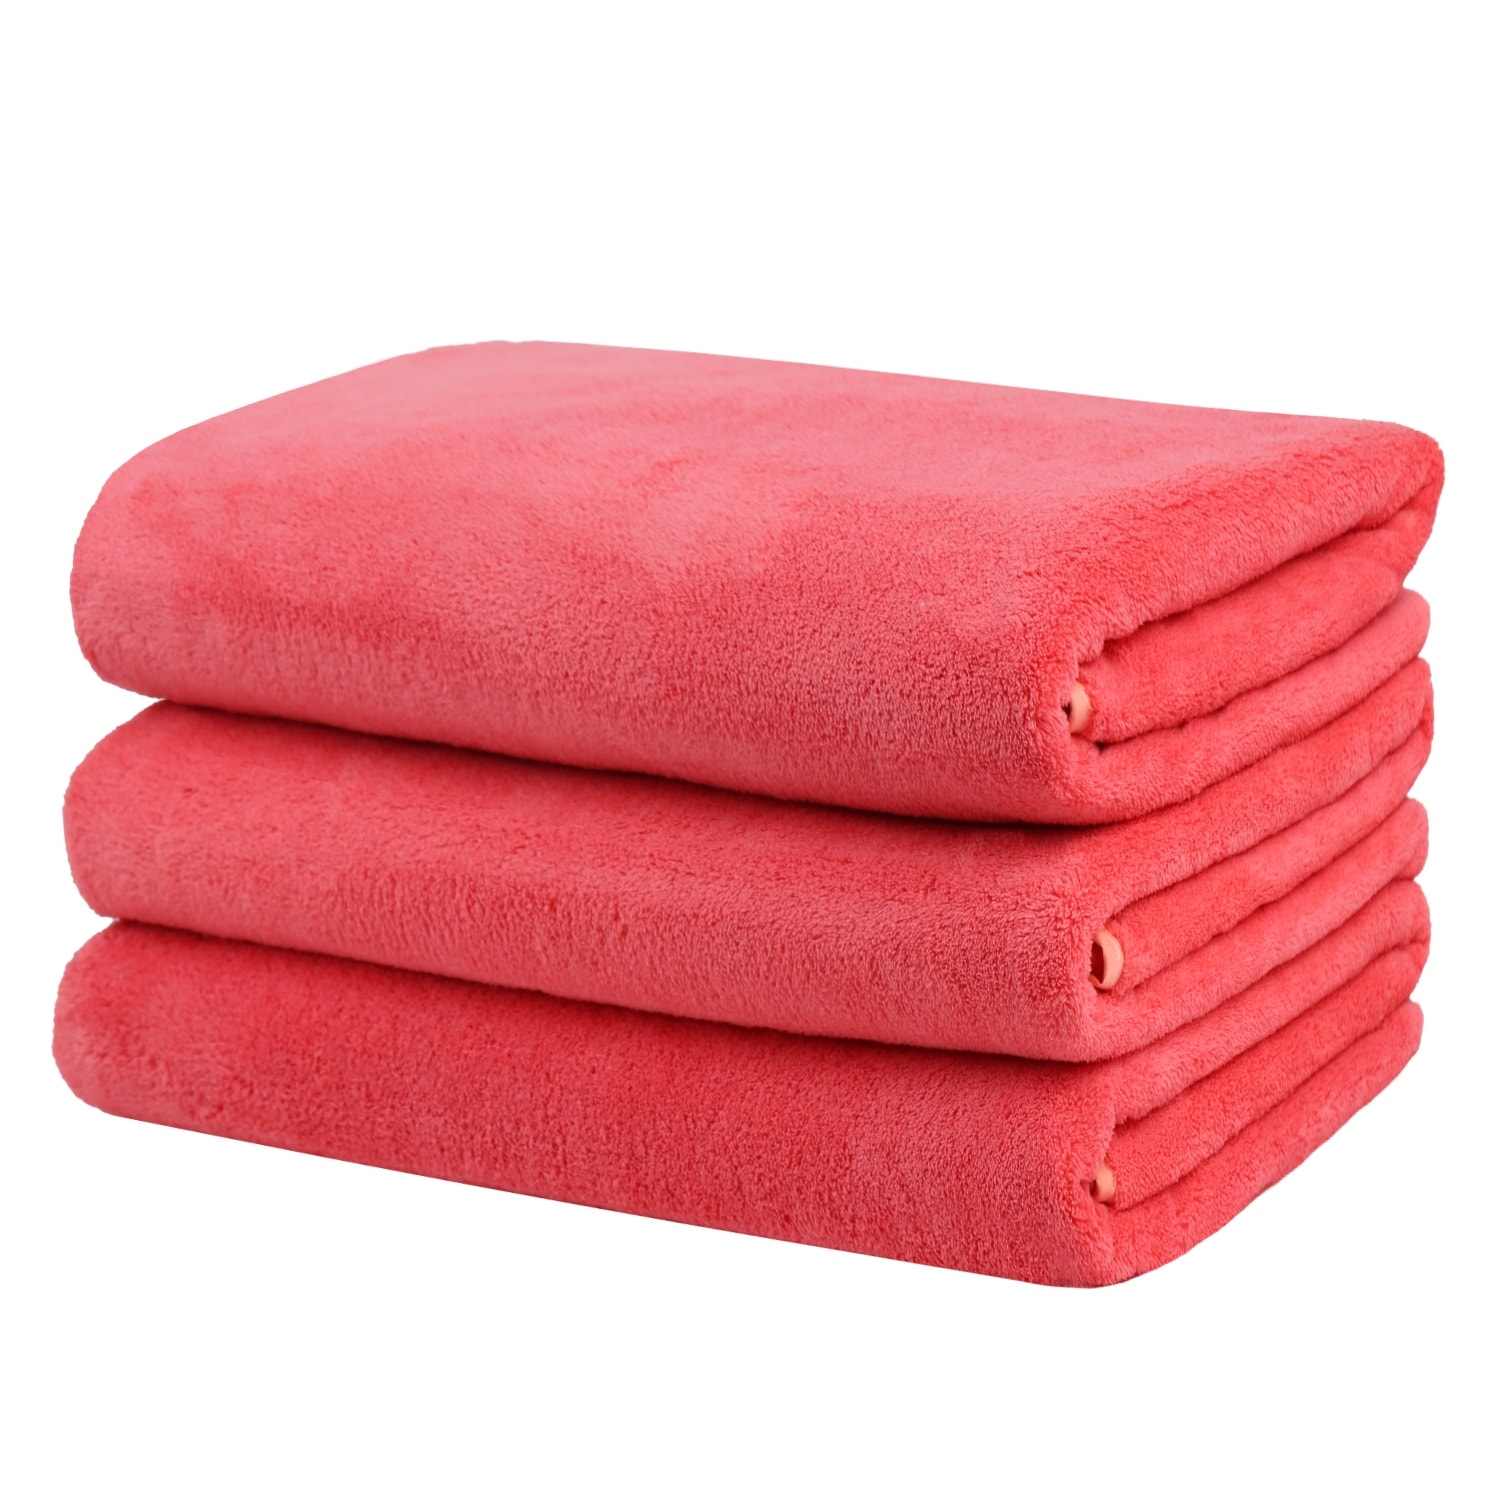 https://ak1.ostkcdn.com/images/products/is/images/direct/0c6a905084330c5a9a1e84d5073dcc4aa946b43e/6-Pack-Plush-Fleece-Towel-Set.jpg